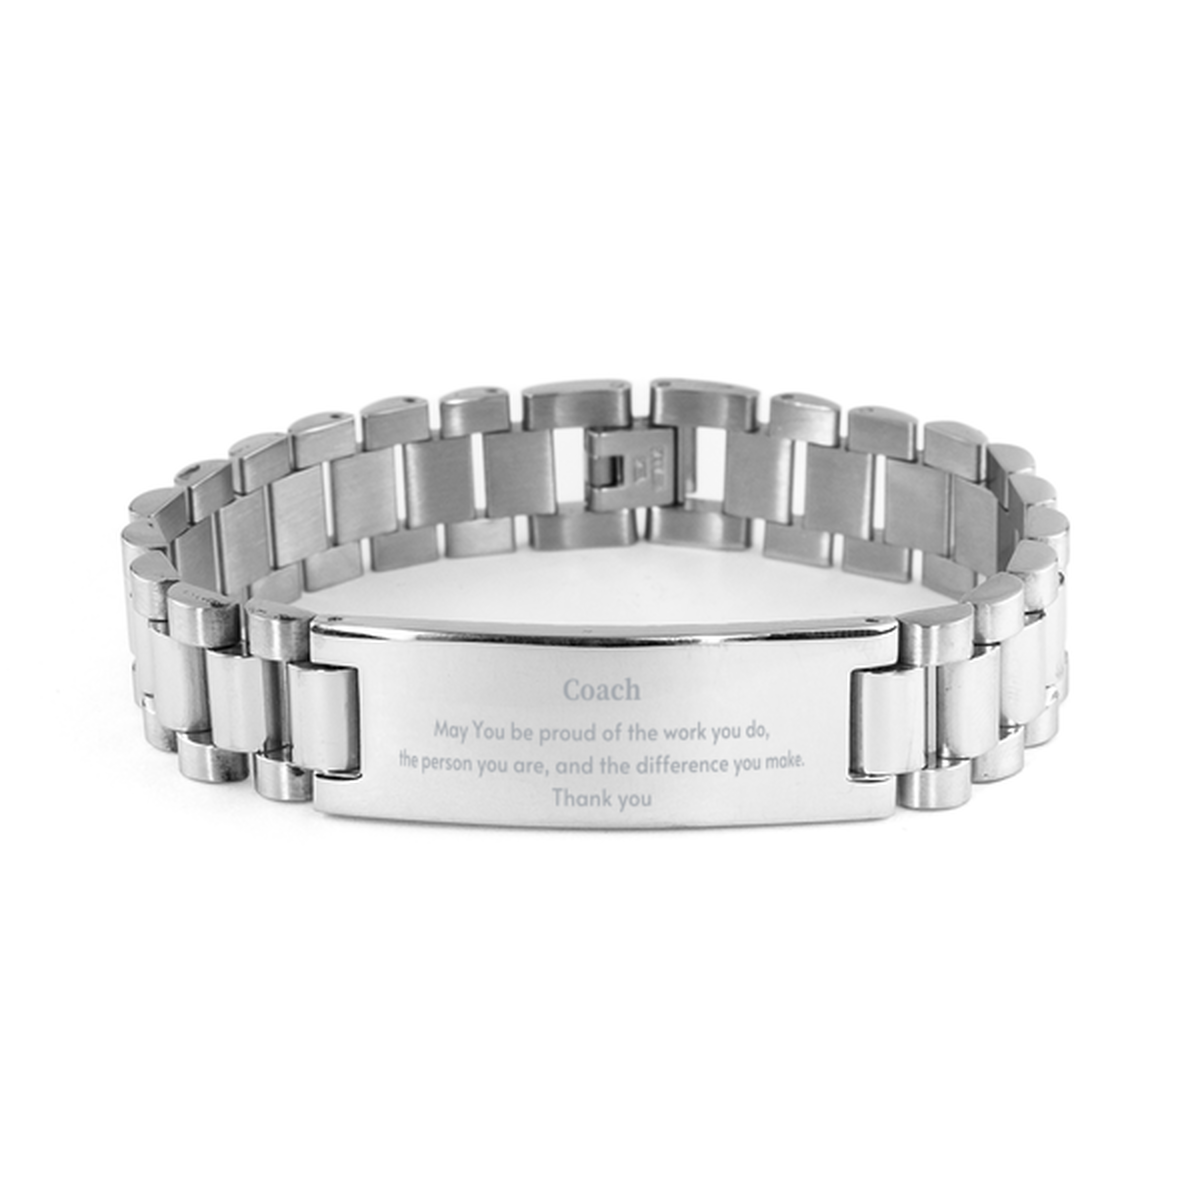 Heartwarming Ladder Stainless Steel Bracelet Retirement Coworkers Gifts for Coach, Coach May You be proud of the work you do, the person you are Gifts for Boss Men Women Friends